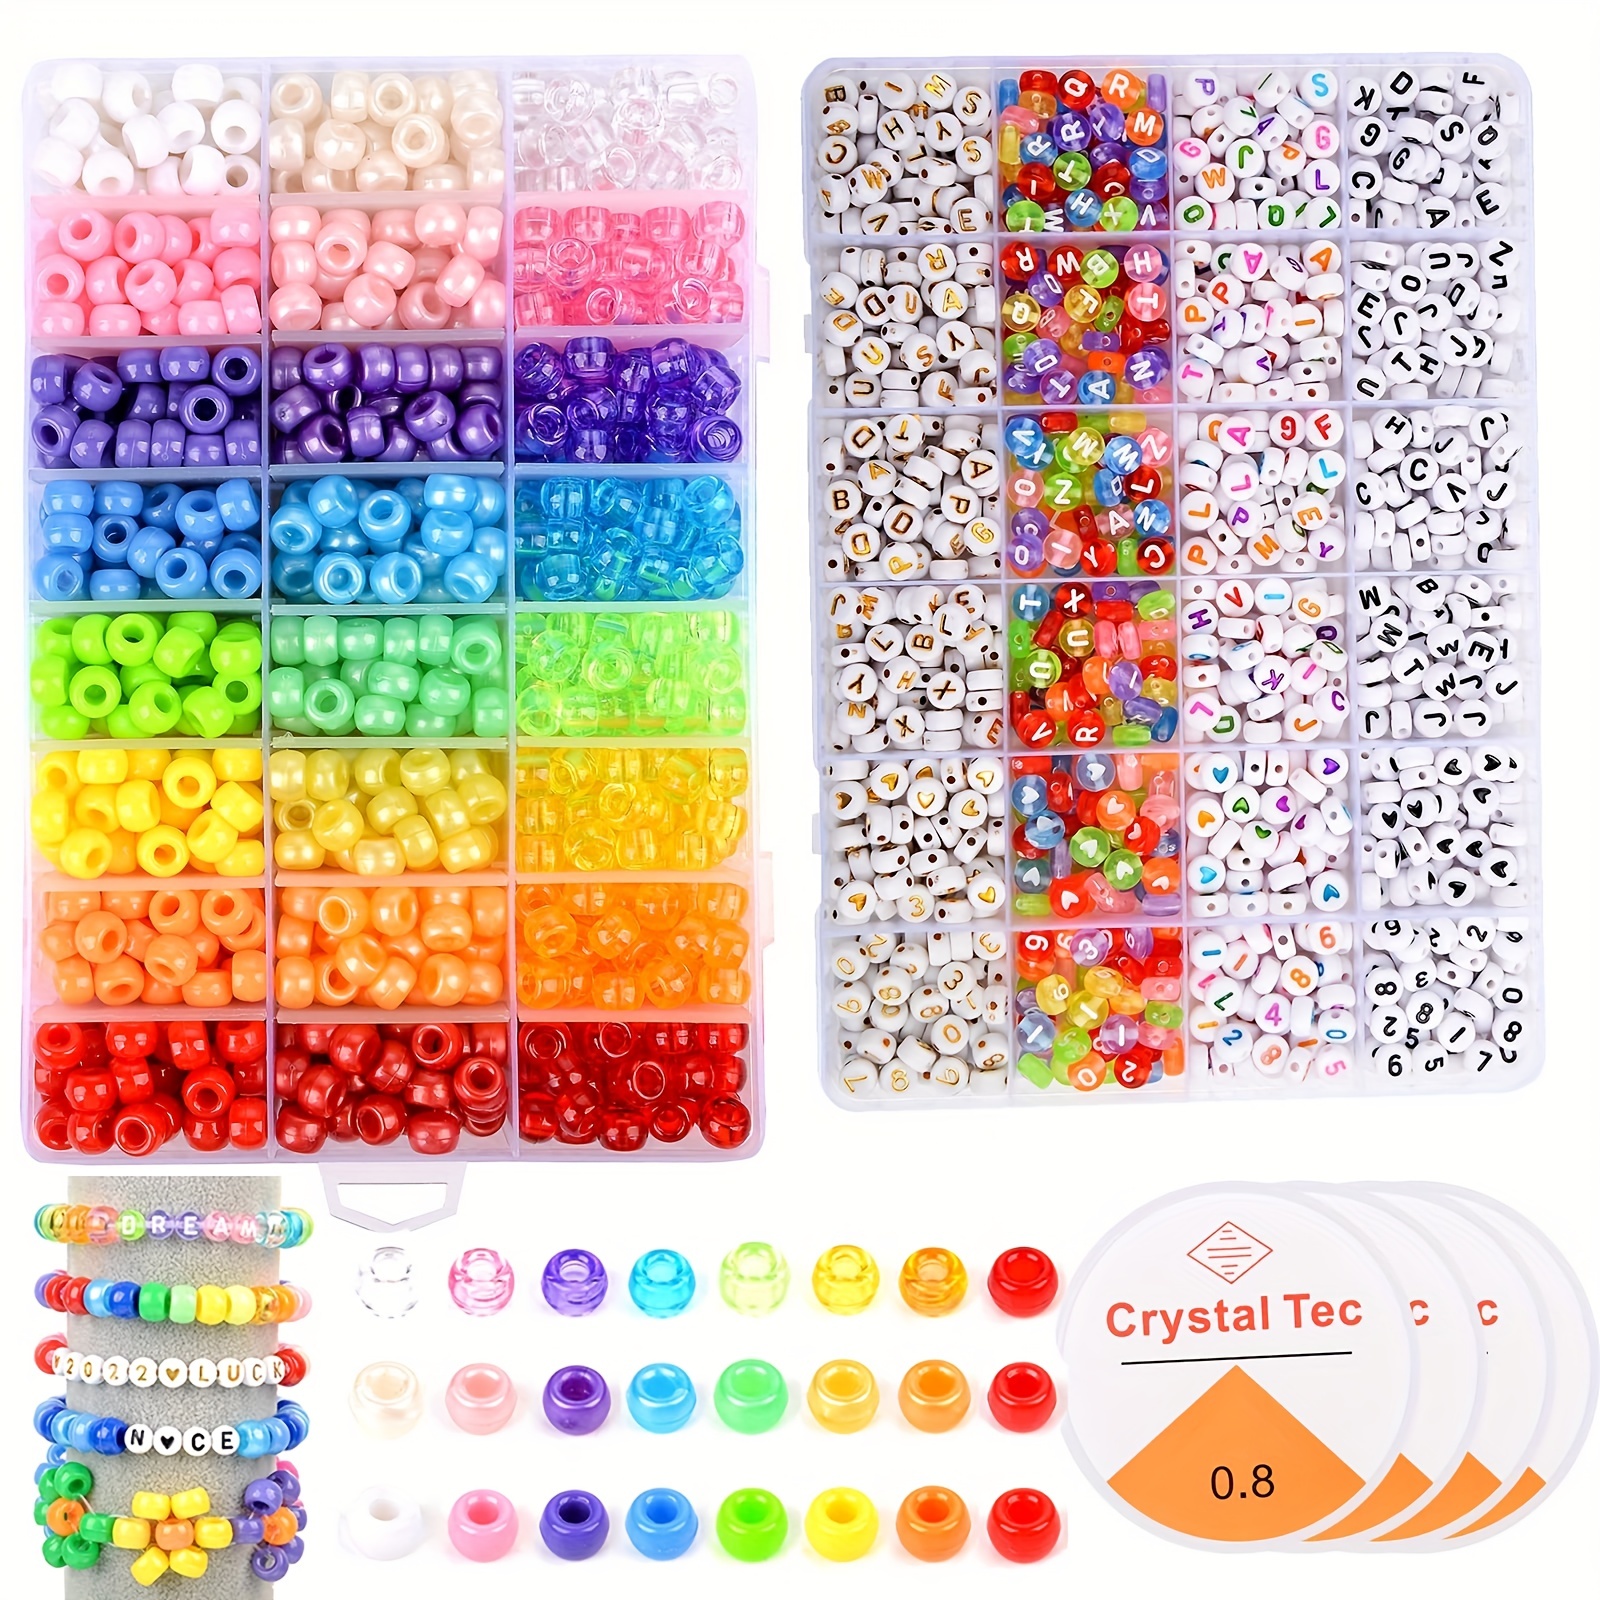  2 Set of Kandi Beads Kit for Bracelet Making, Rainbow Hair  Beads for Braids for Girls Women, Pony Beads for Jewelry Making with  Colorful Letter Beads Hair Beaders and Hair Rubber